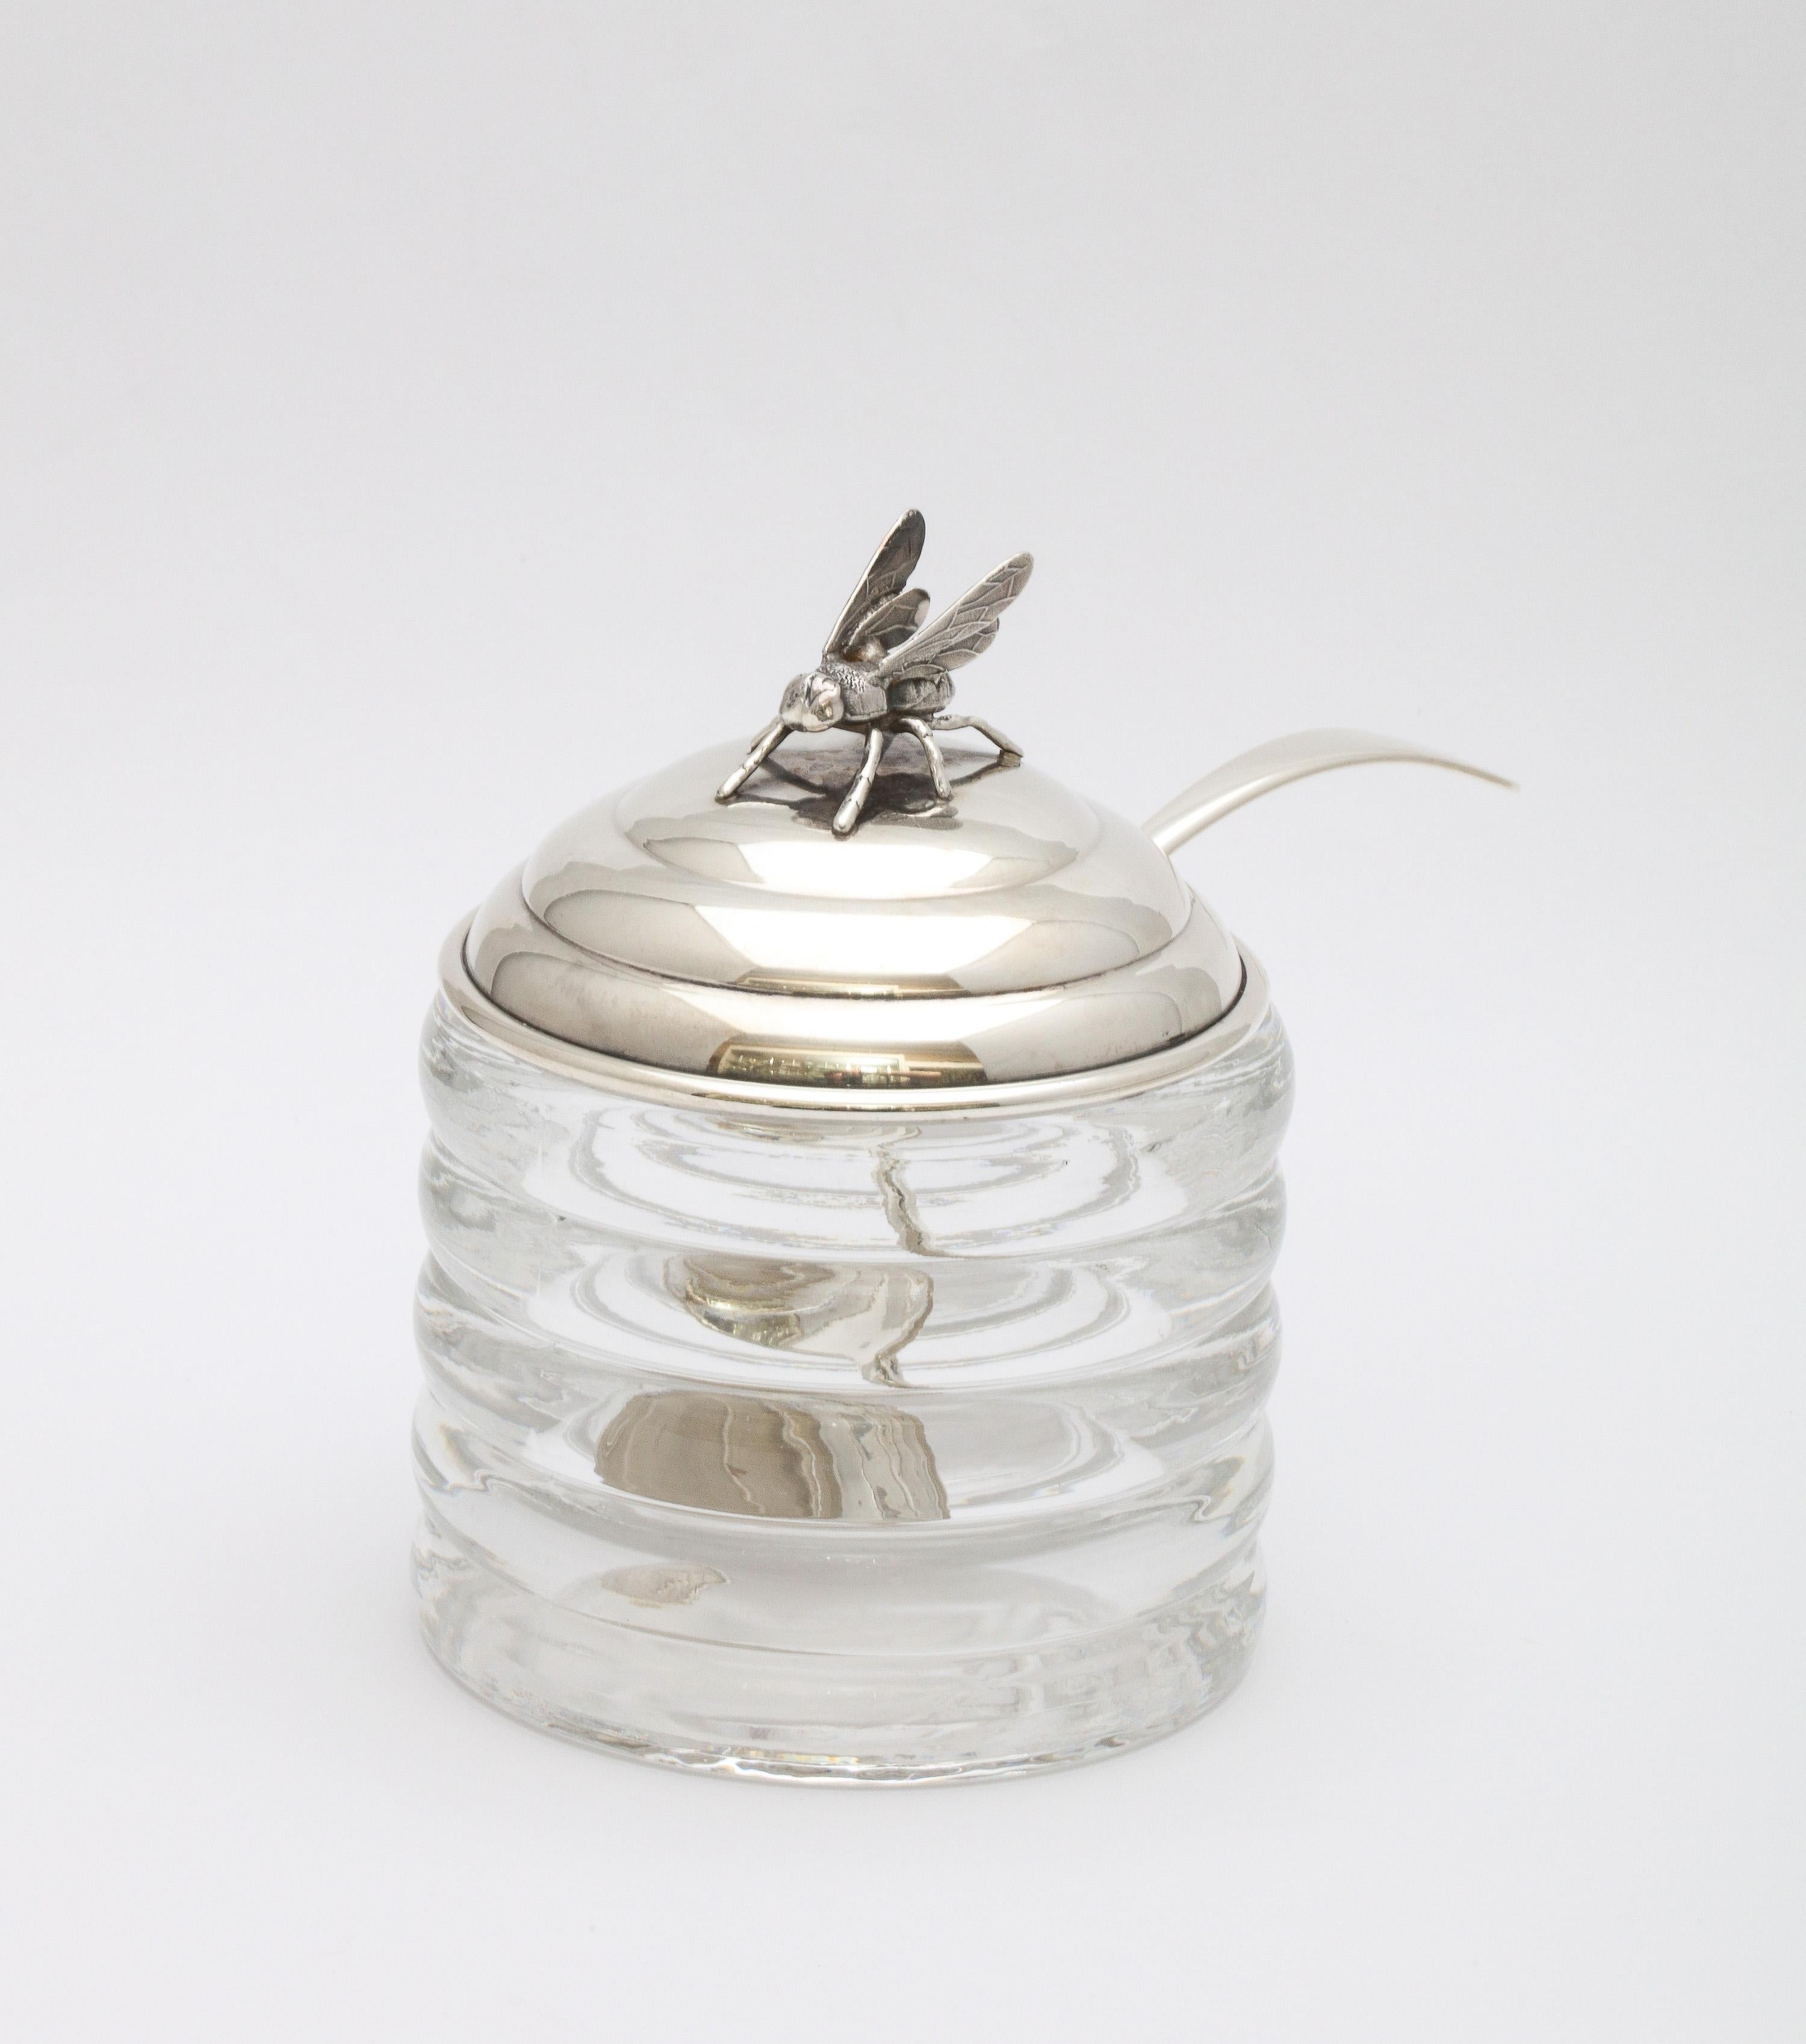 Art Deco Period Sterling Silver-Mounted Beehive-Form Honey Jar With Spoon 3